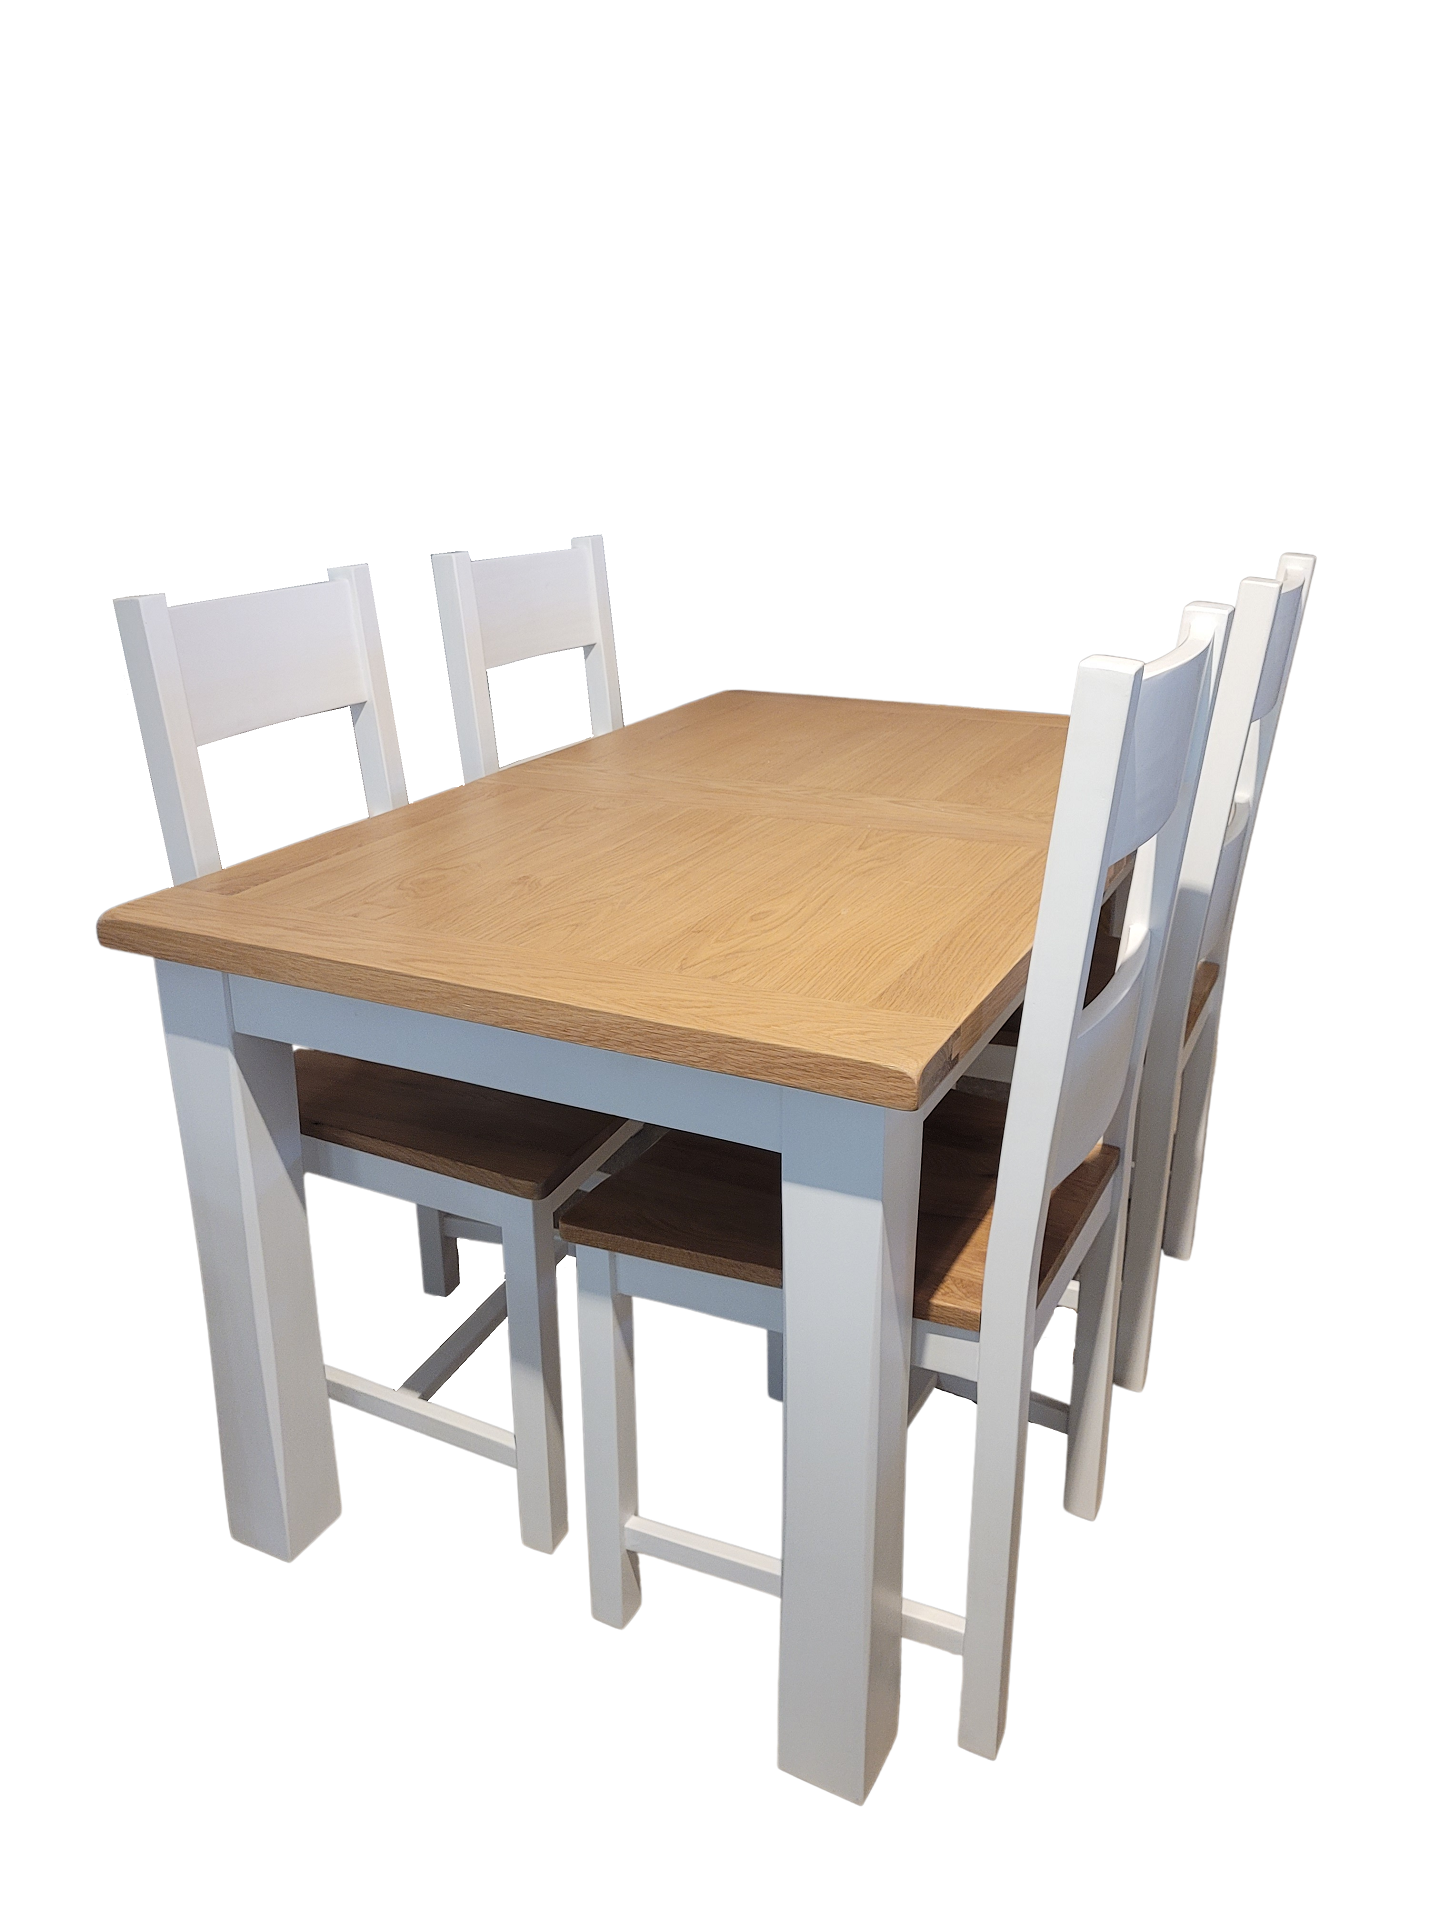 Cambridge Large Extending Dining Table